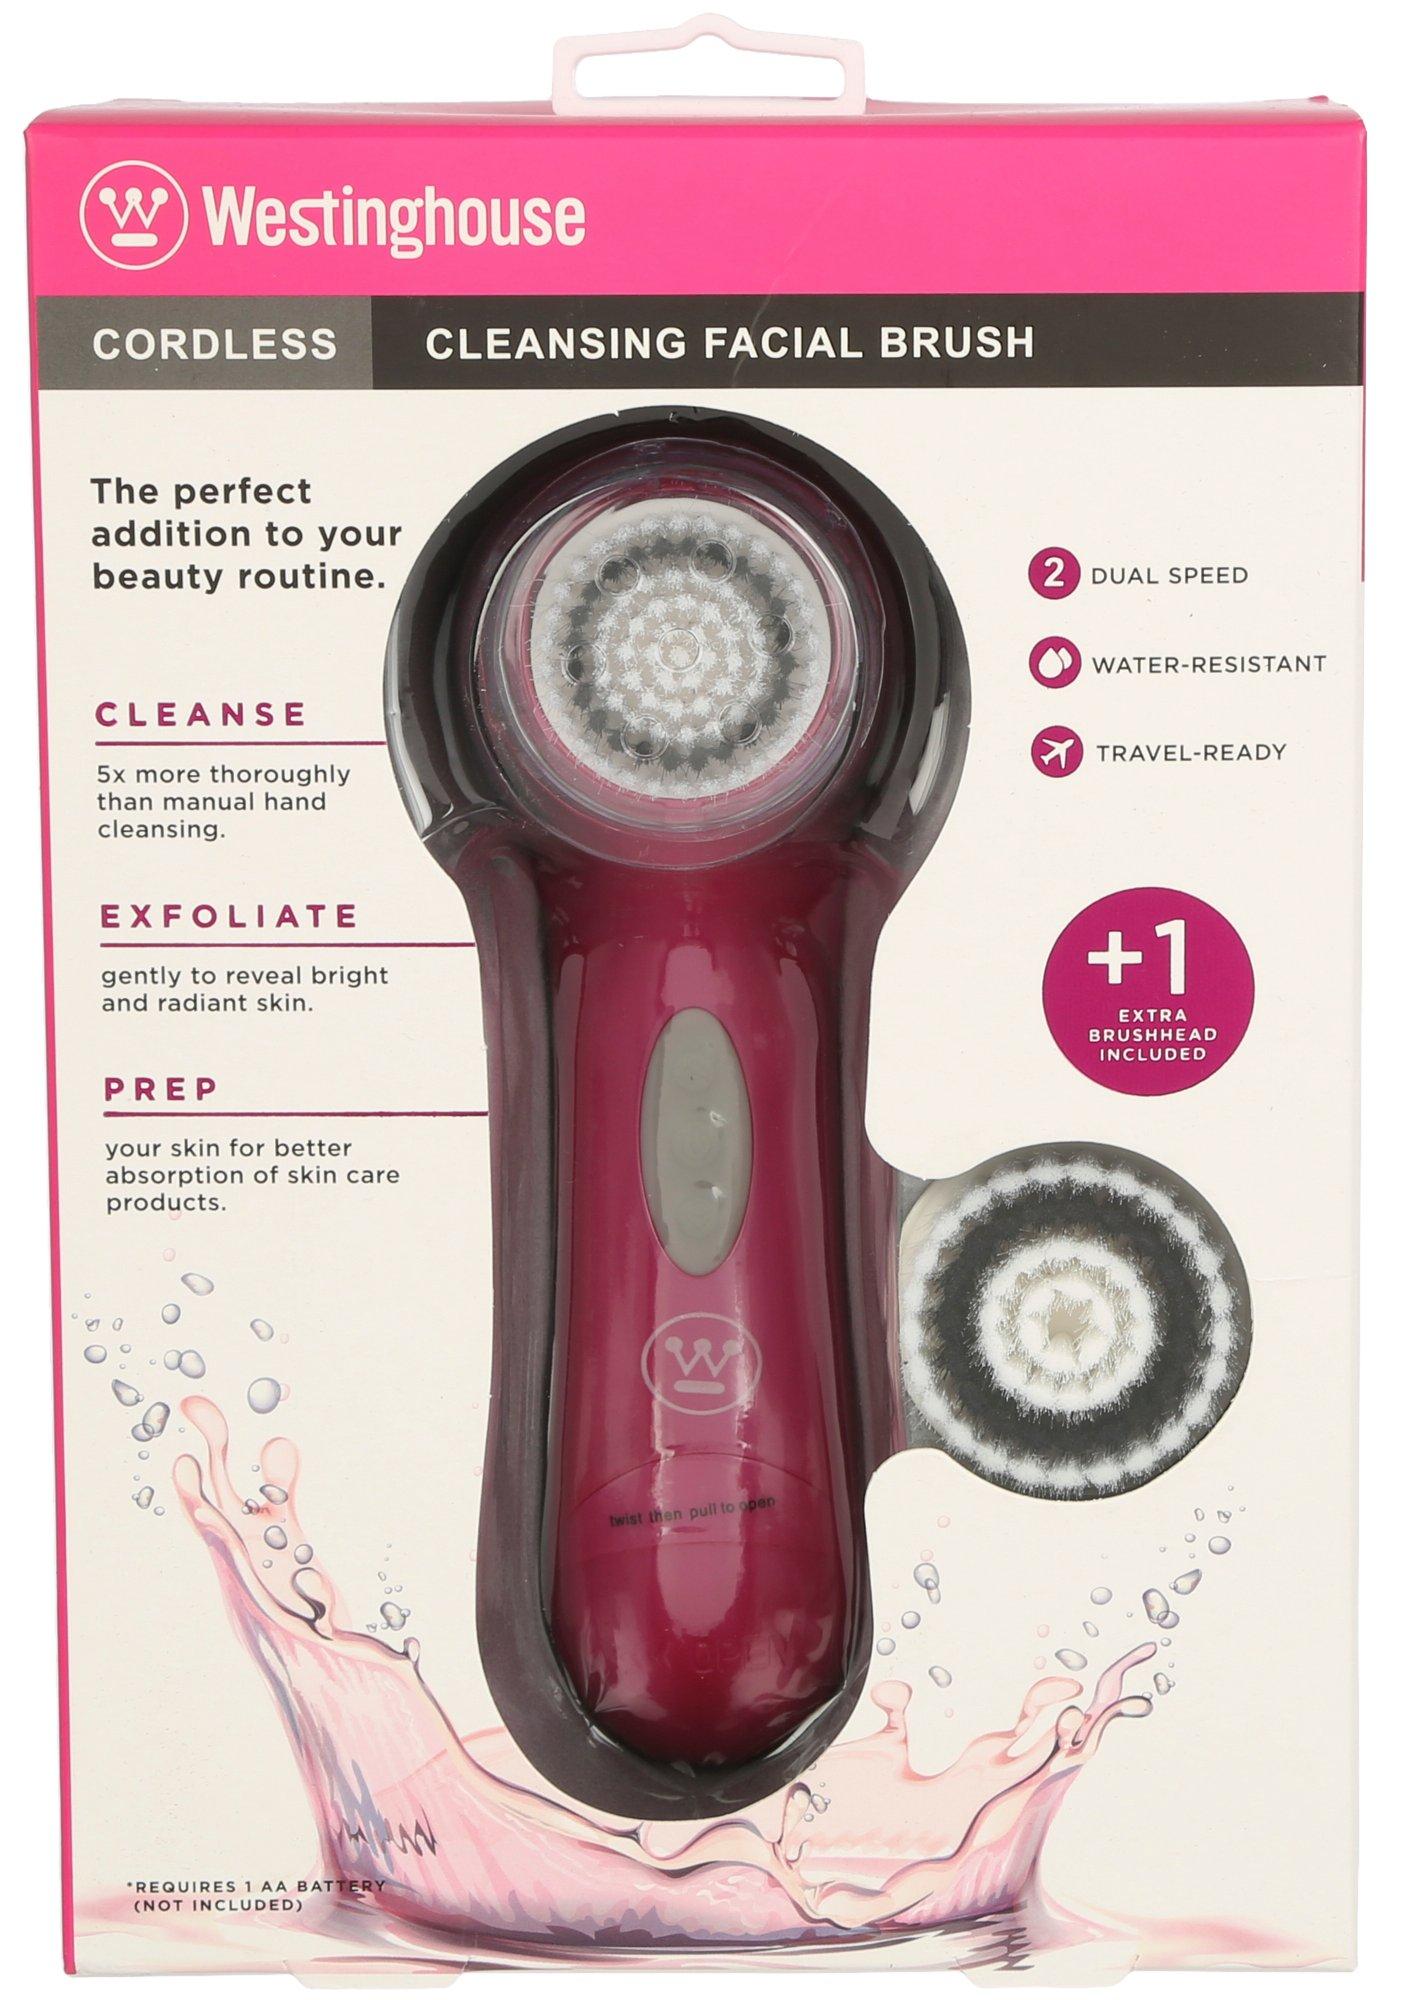 Westinghouse Cordless Cleansing Facial Brush